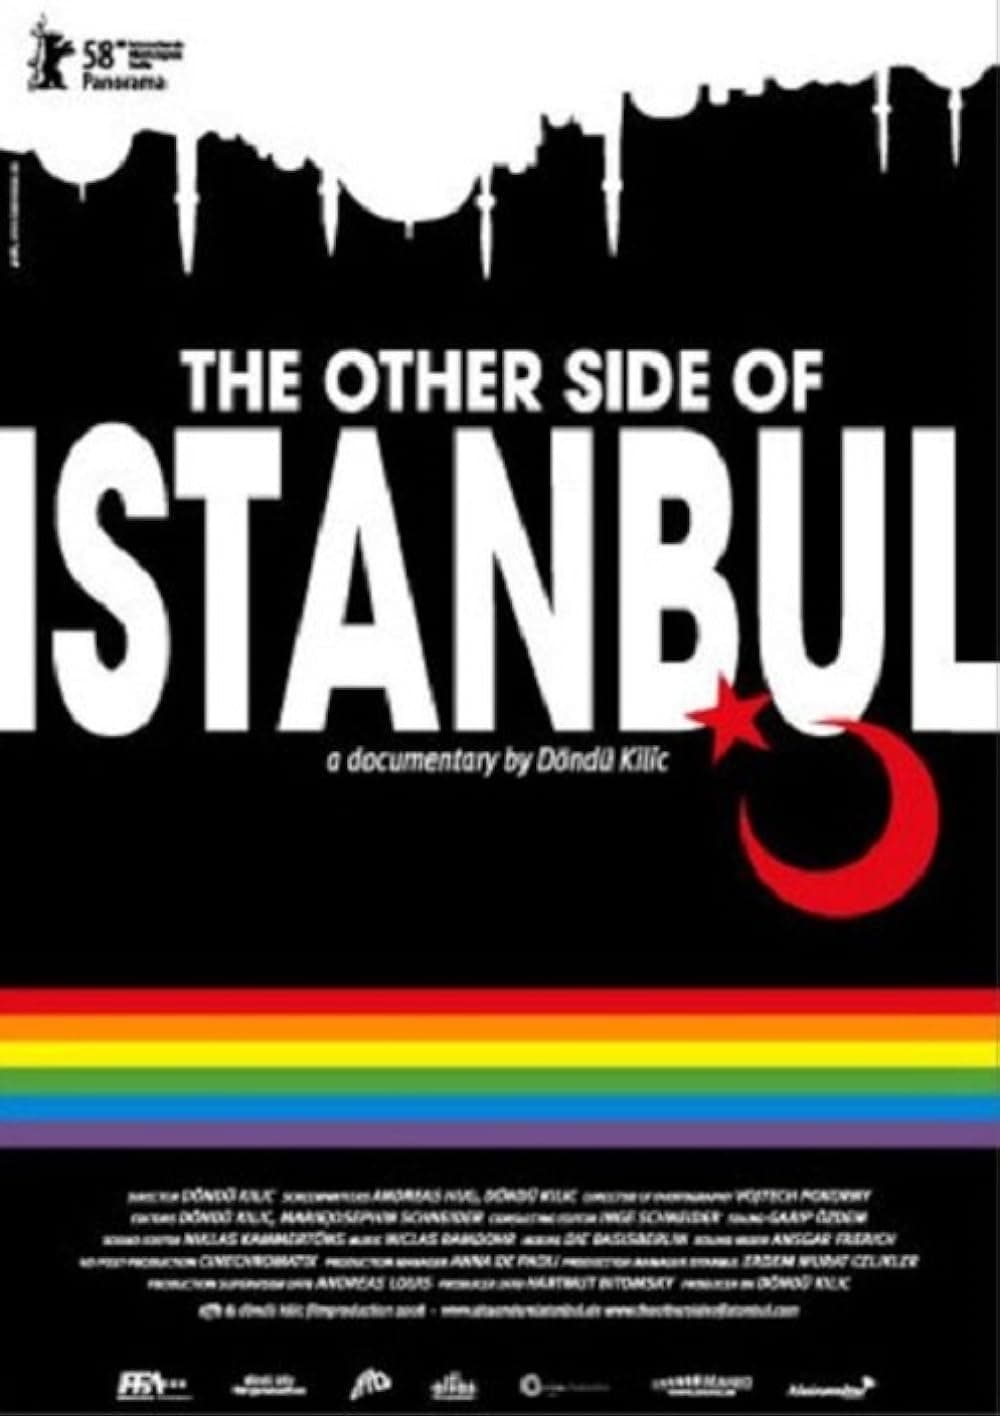 The Other Side of Istanbul